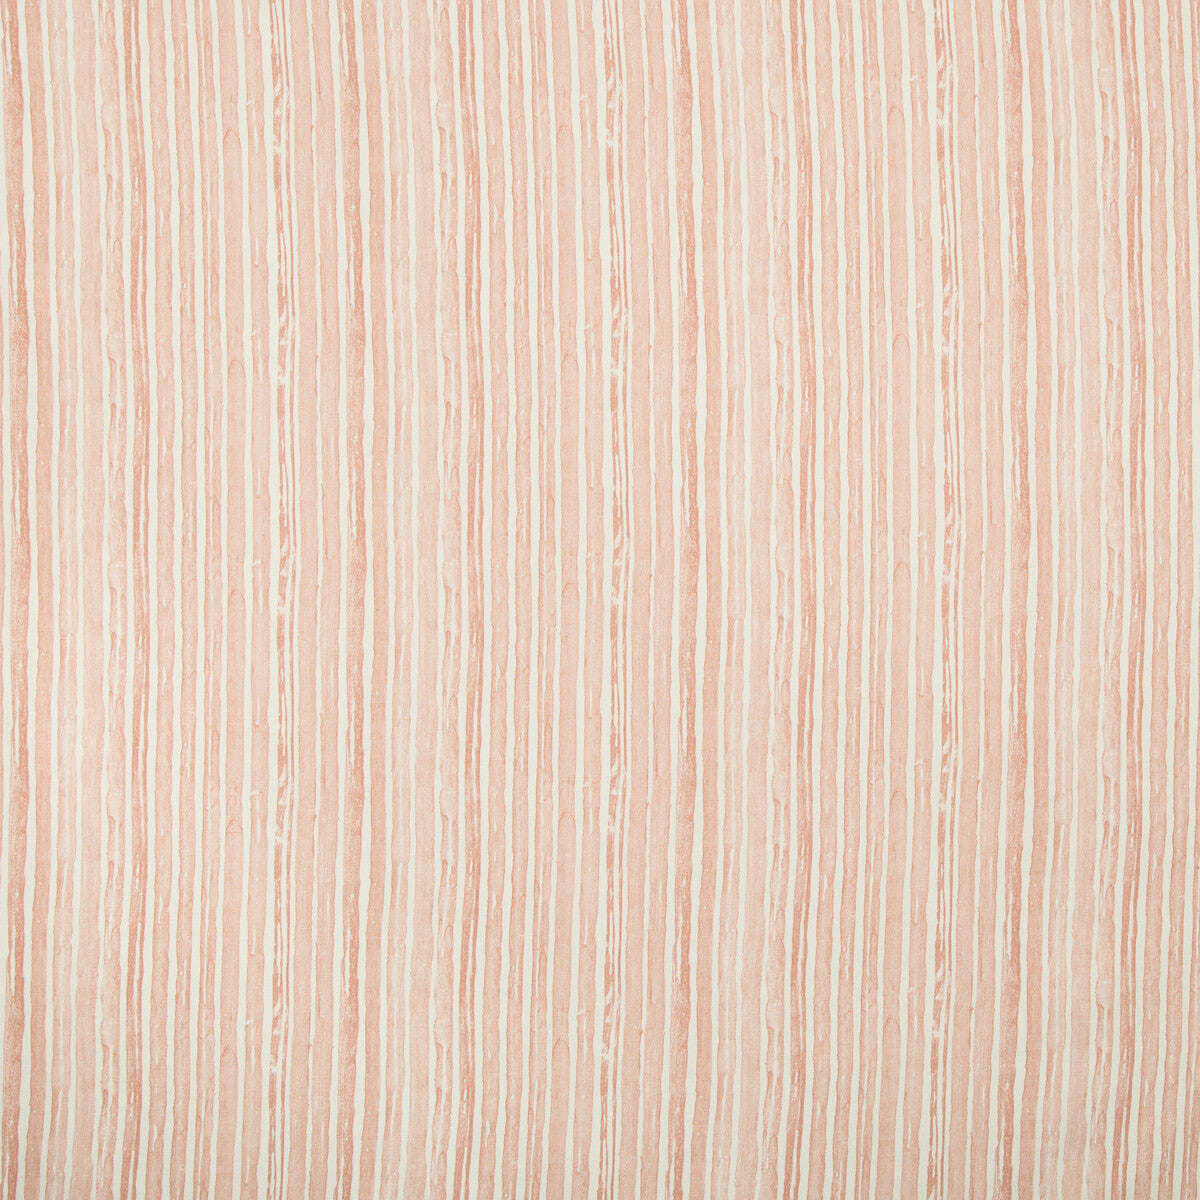 Benson Stripe fabric in faded petal color - pattern 2019151.7.0 - by Lee Jofa in the Carrier And Company collection